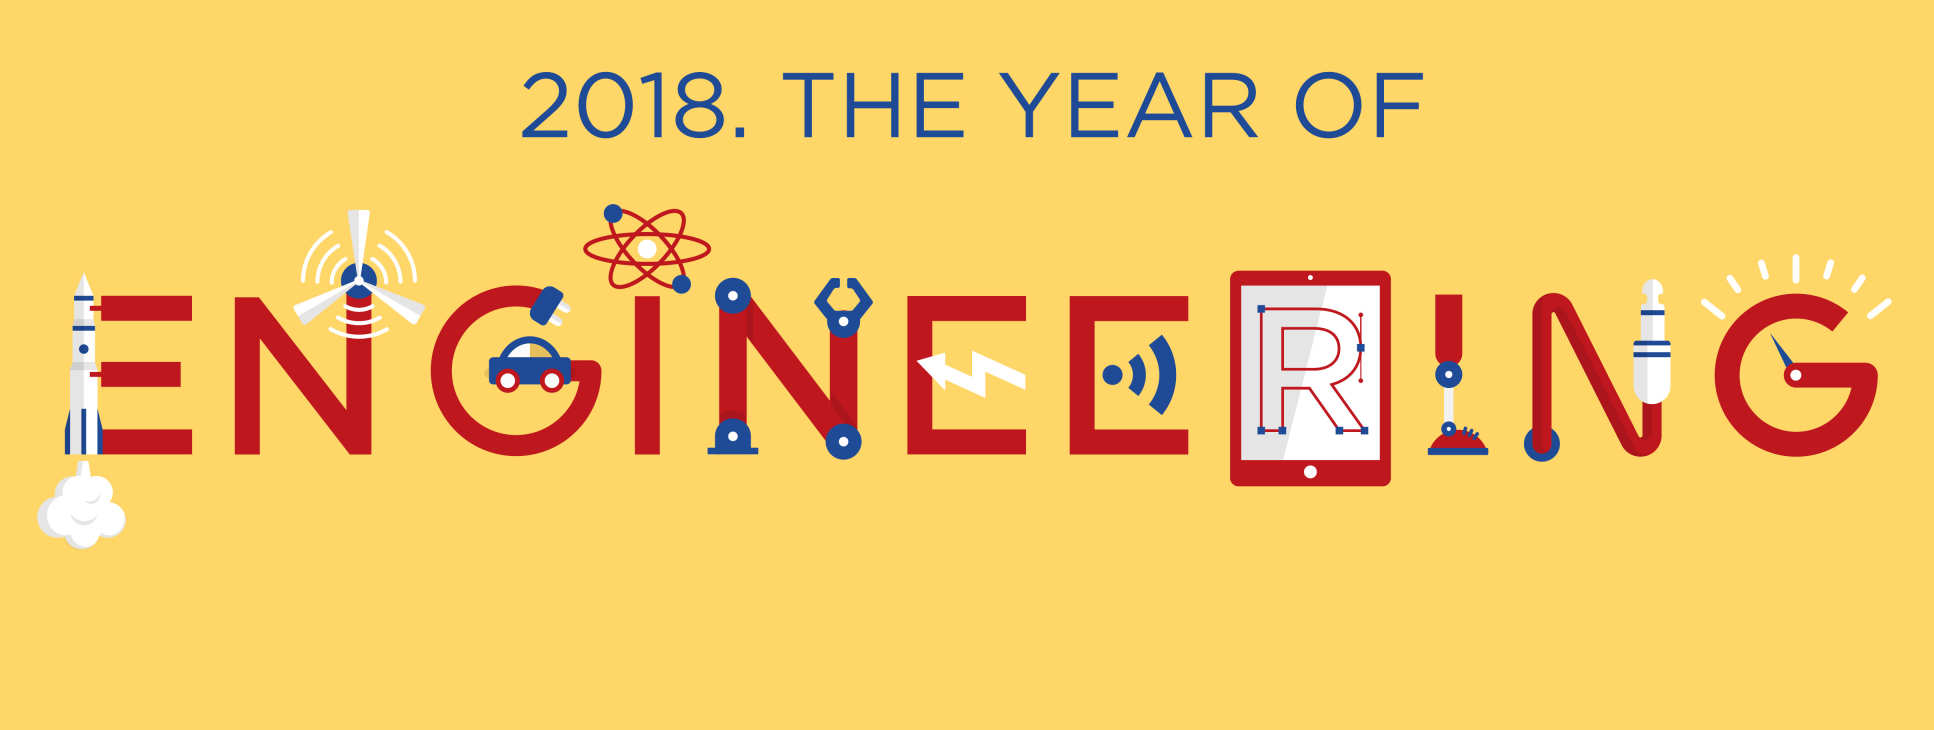 Year of Engineering banner